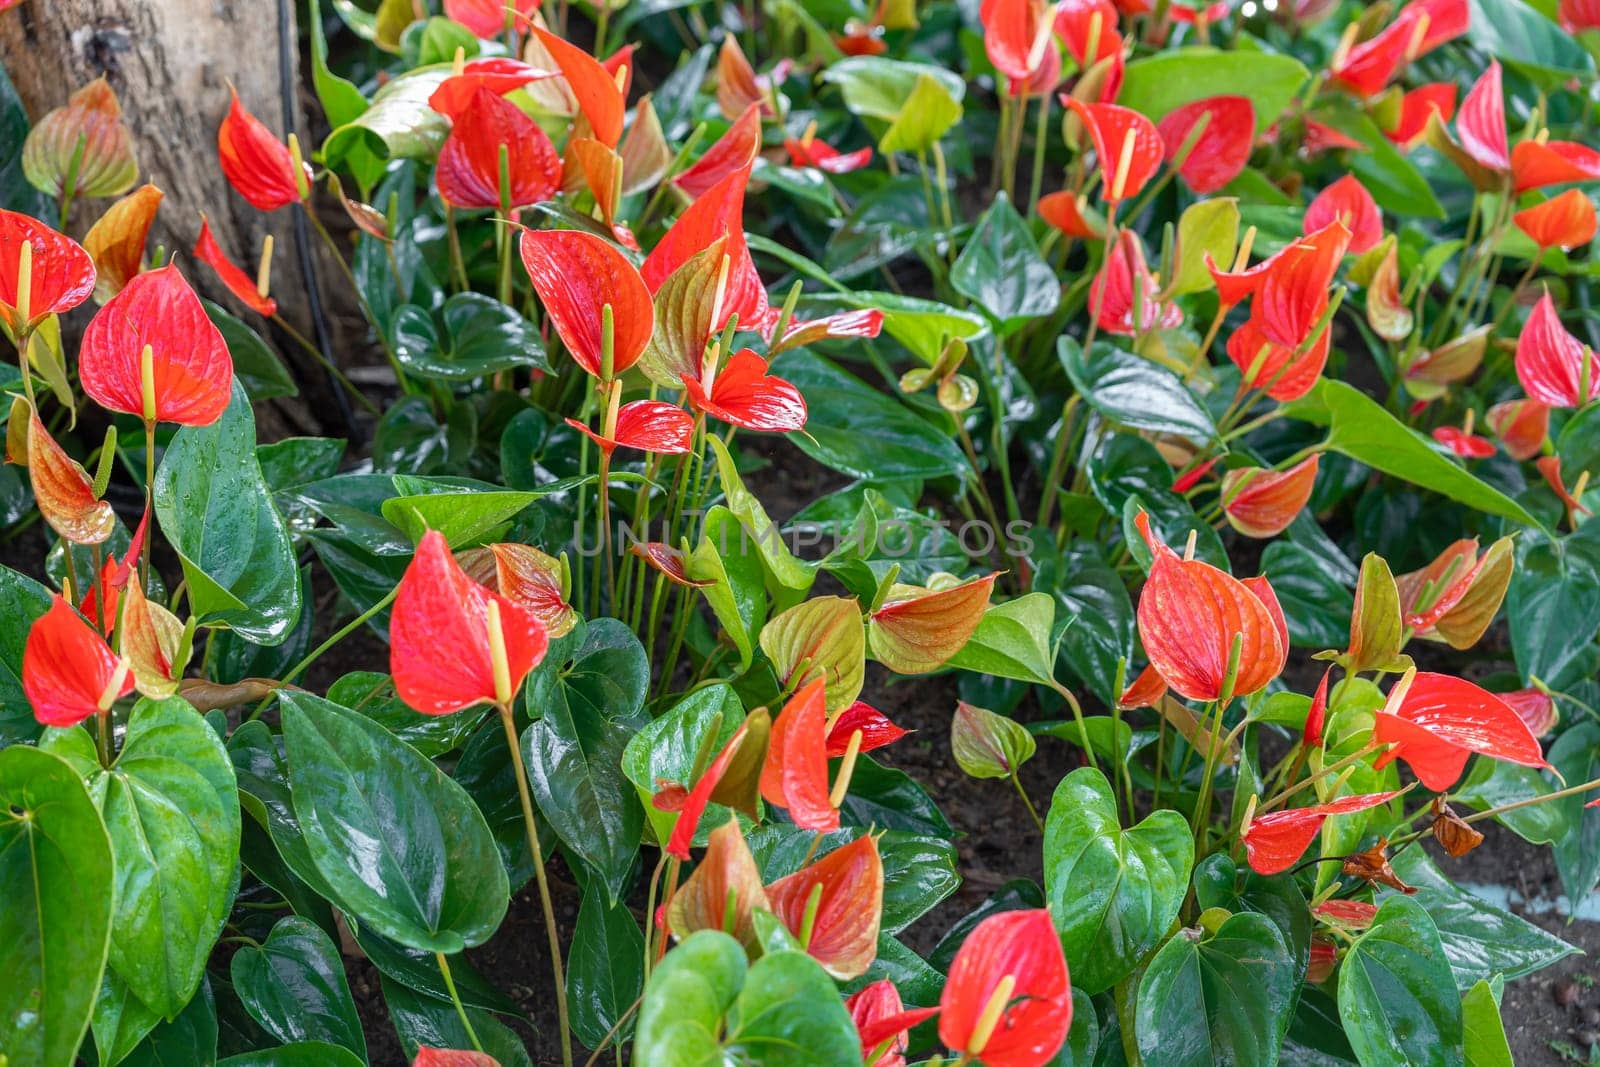 The Many red anthuriums with green leaves. by Gamjai